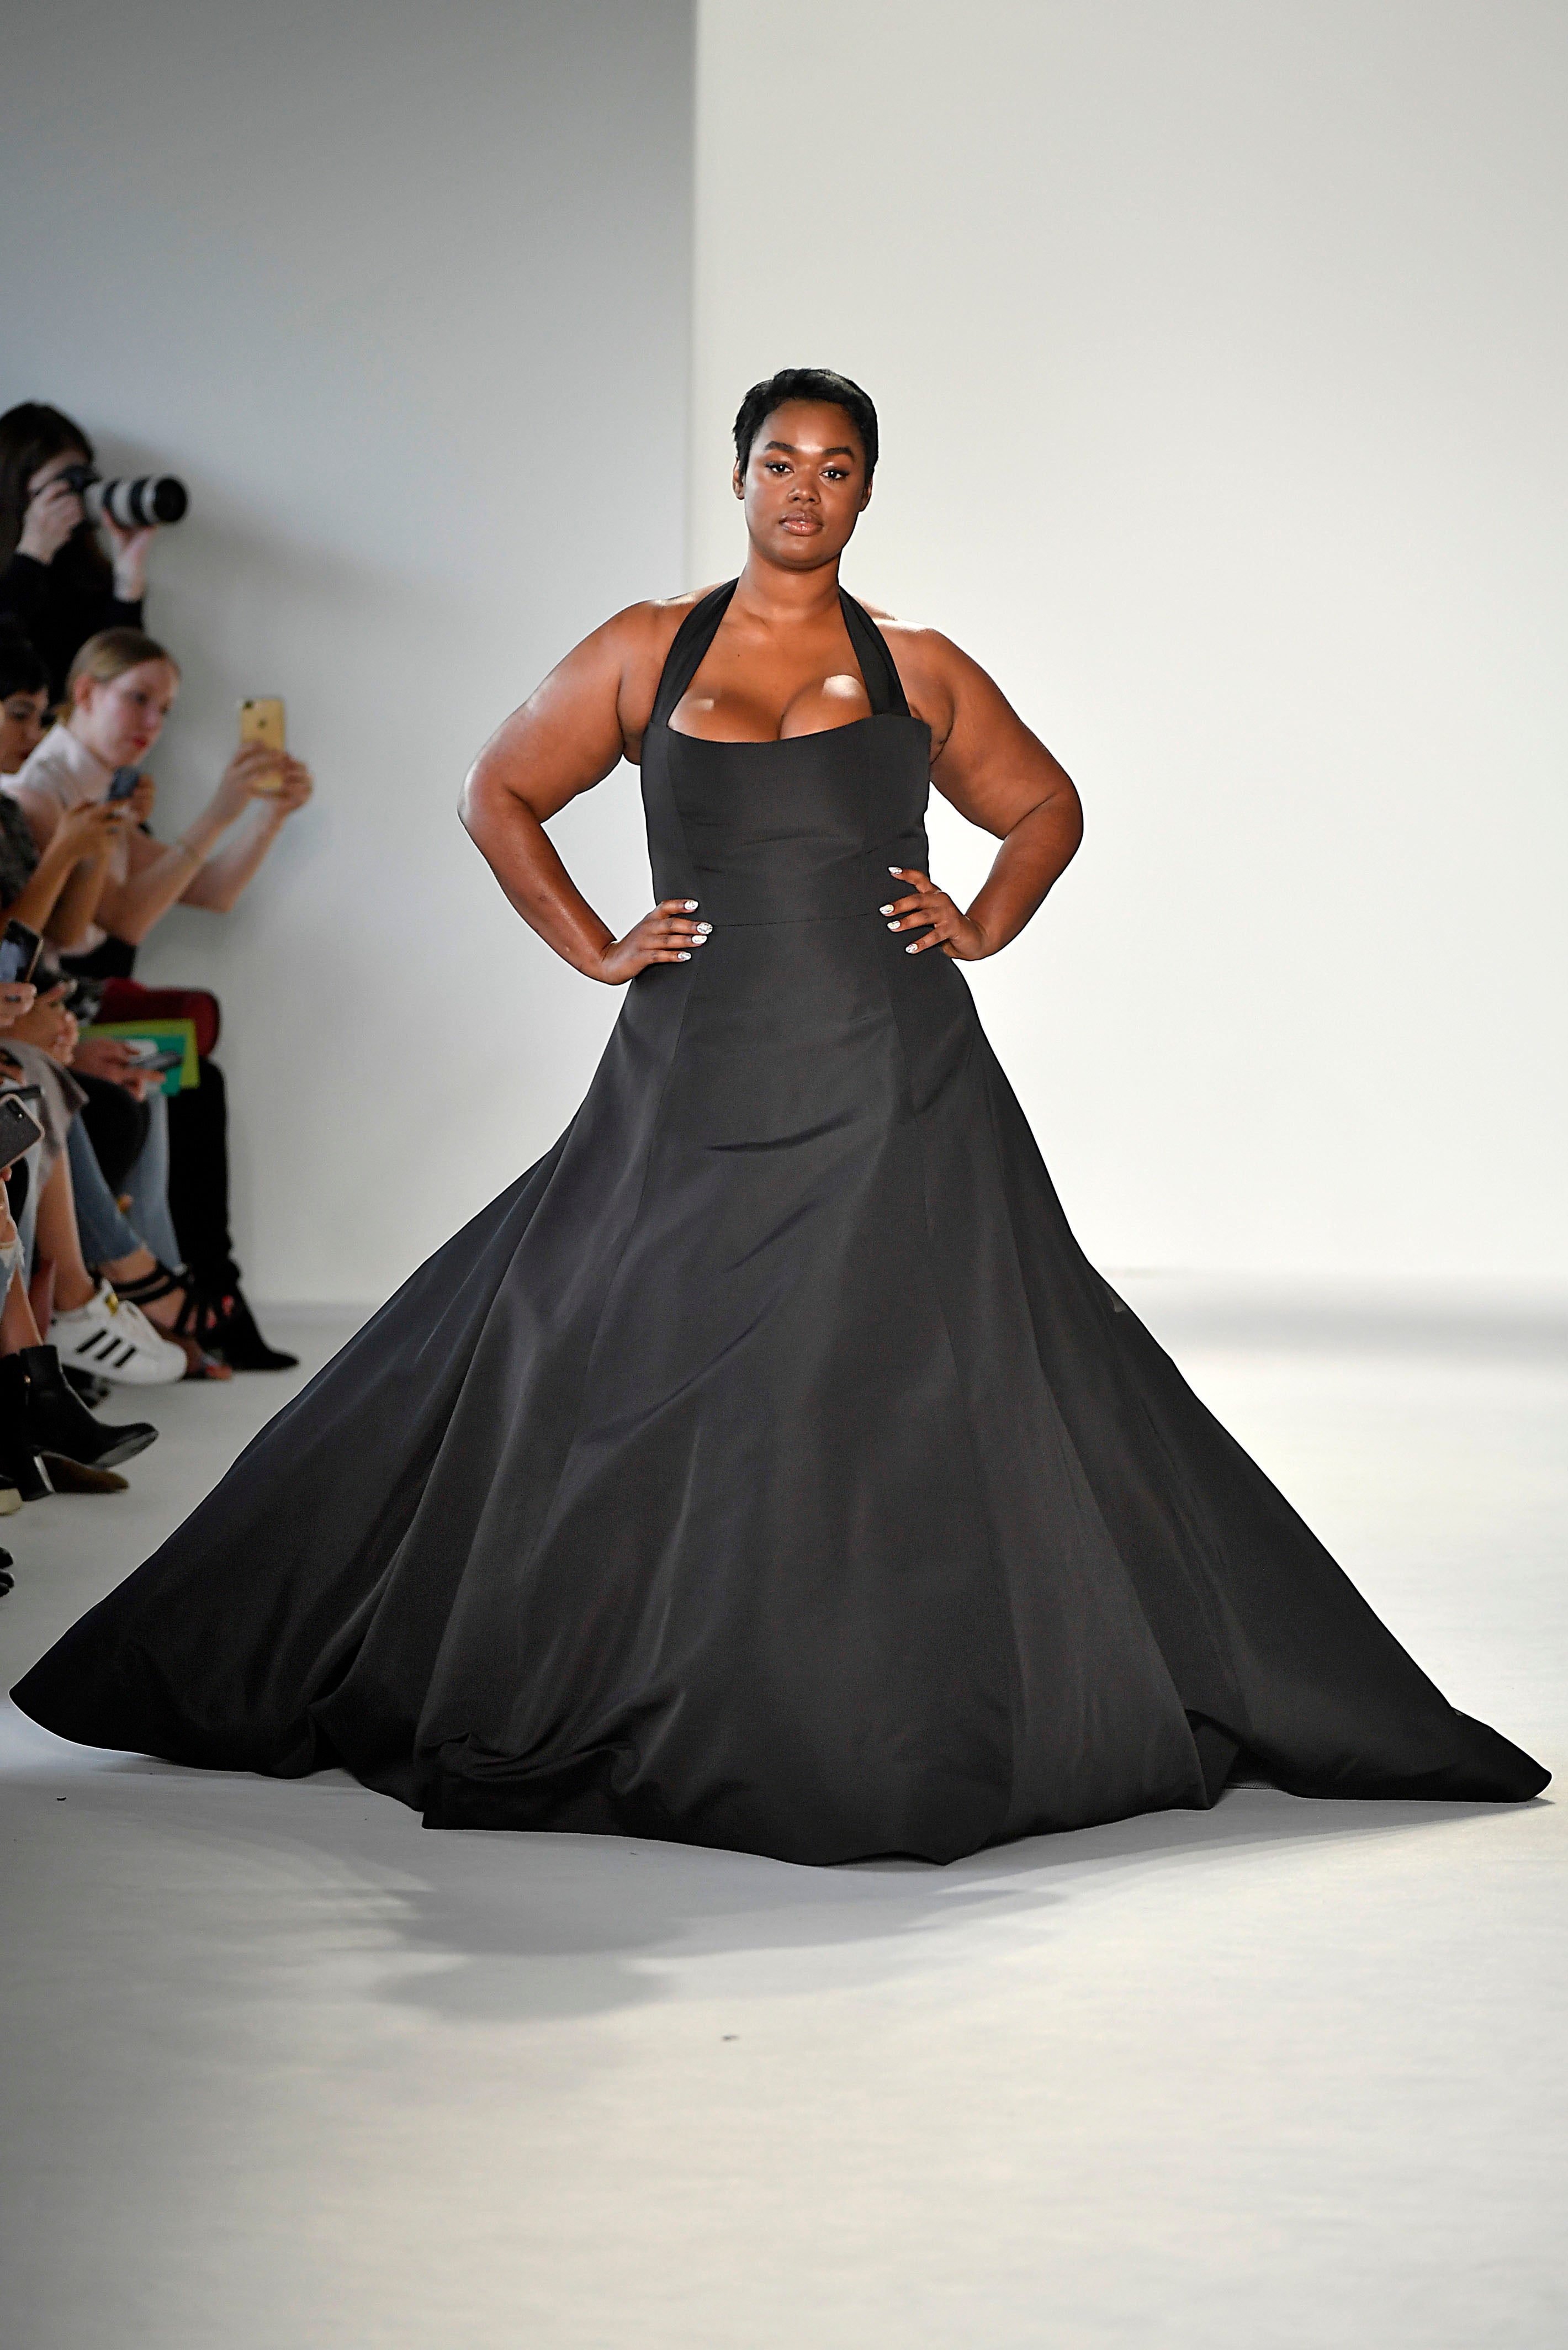 Christian Siriano Celebrates Curvy Bodies and Diversity At His New York Fashion Week Show
